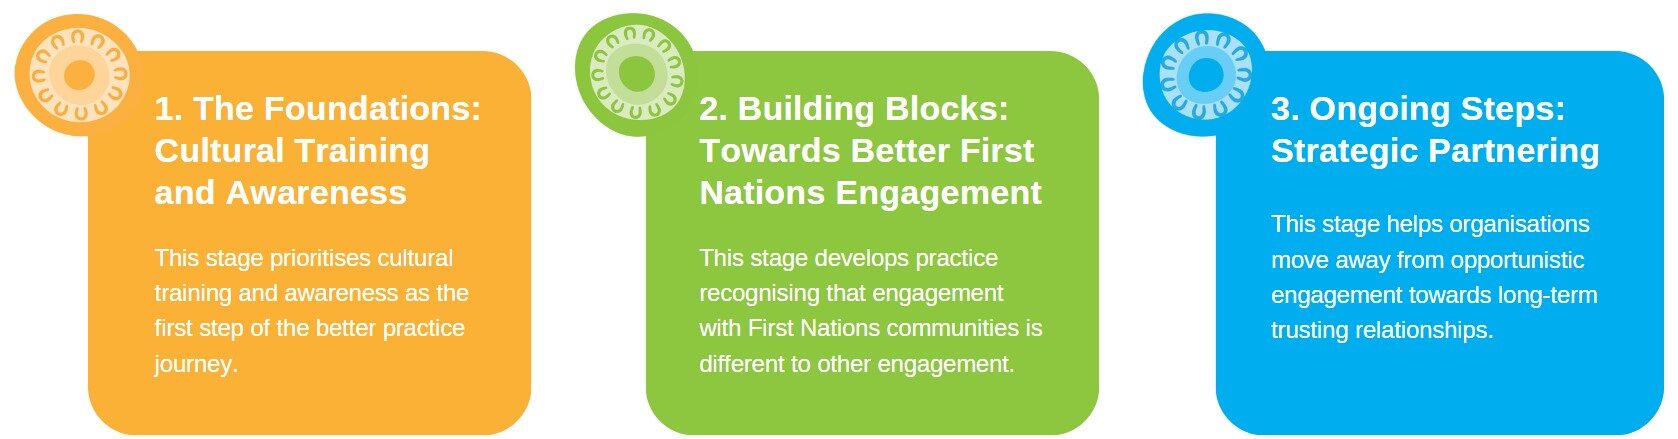 First Nations Engagement Toolkit - 3 sections to discover